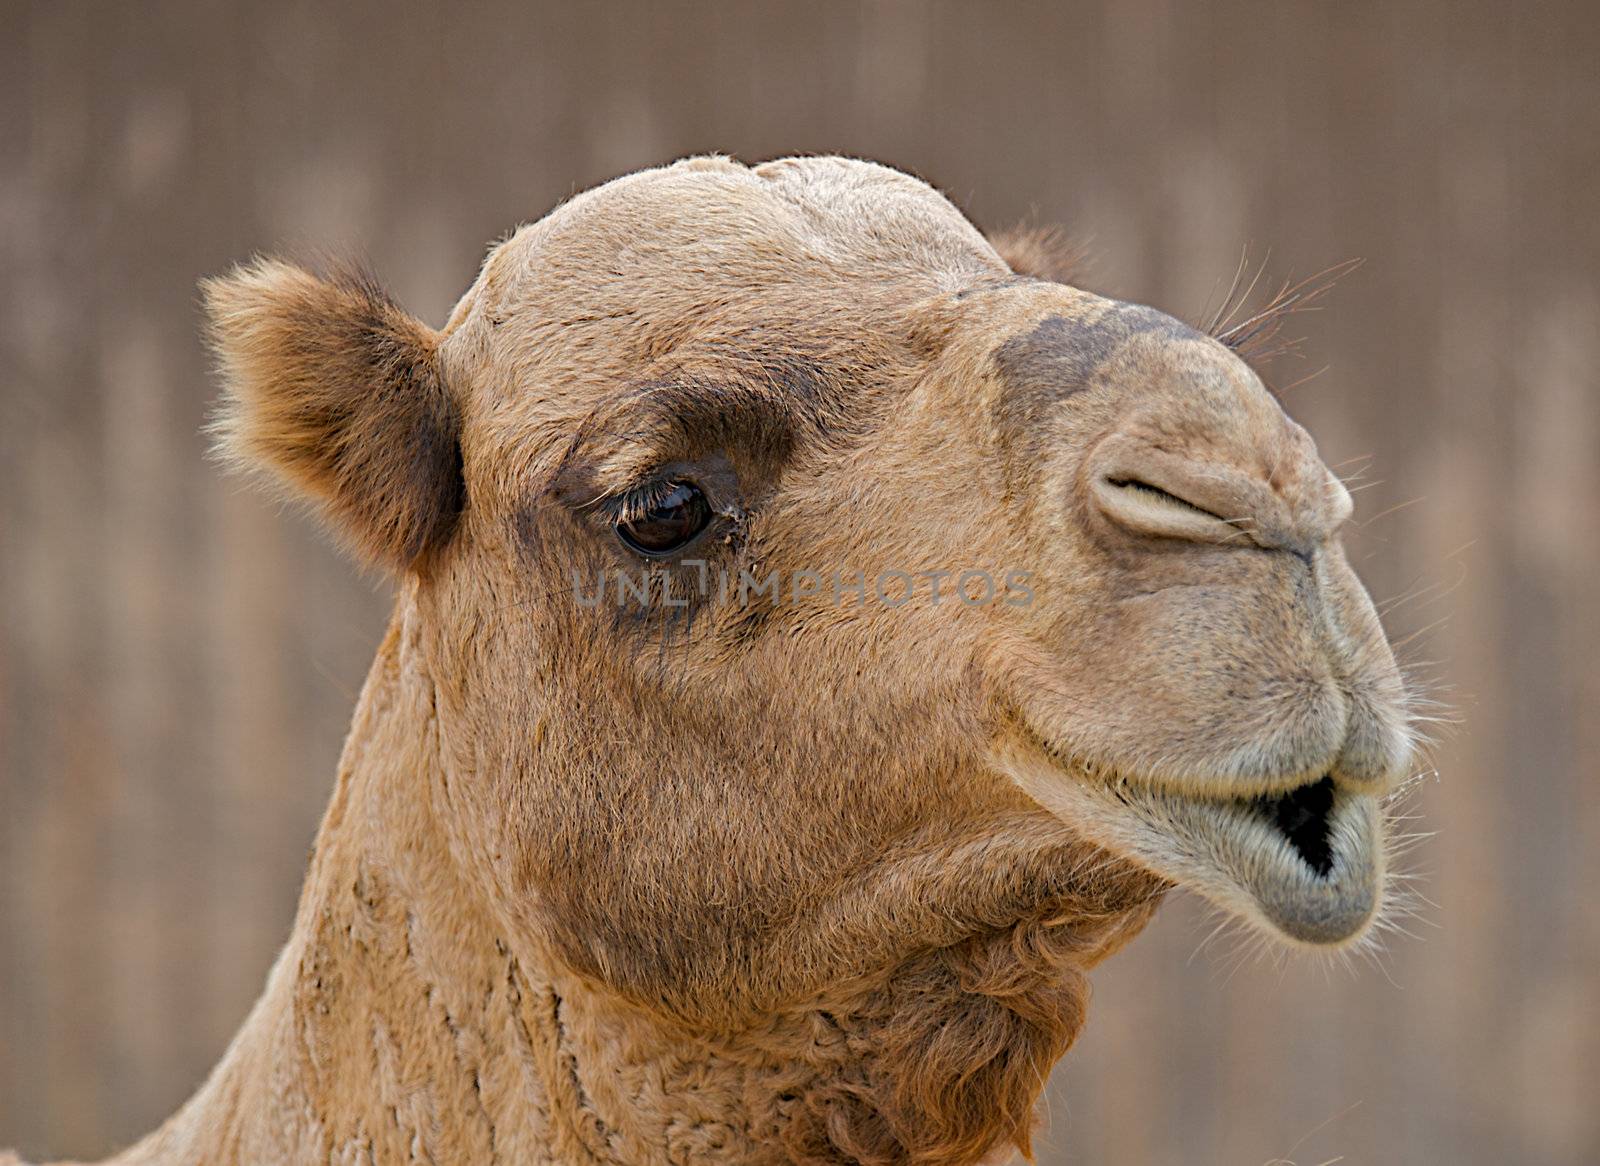 Close up of the face of a camel with pouty lips.